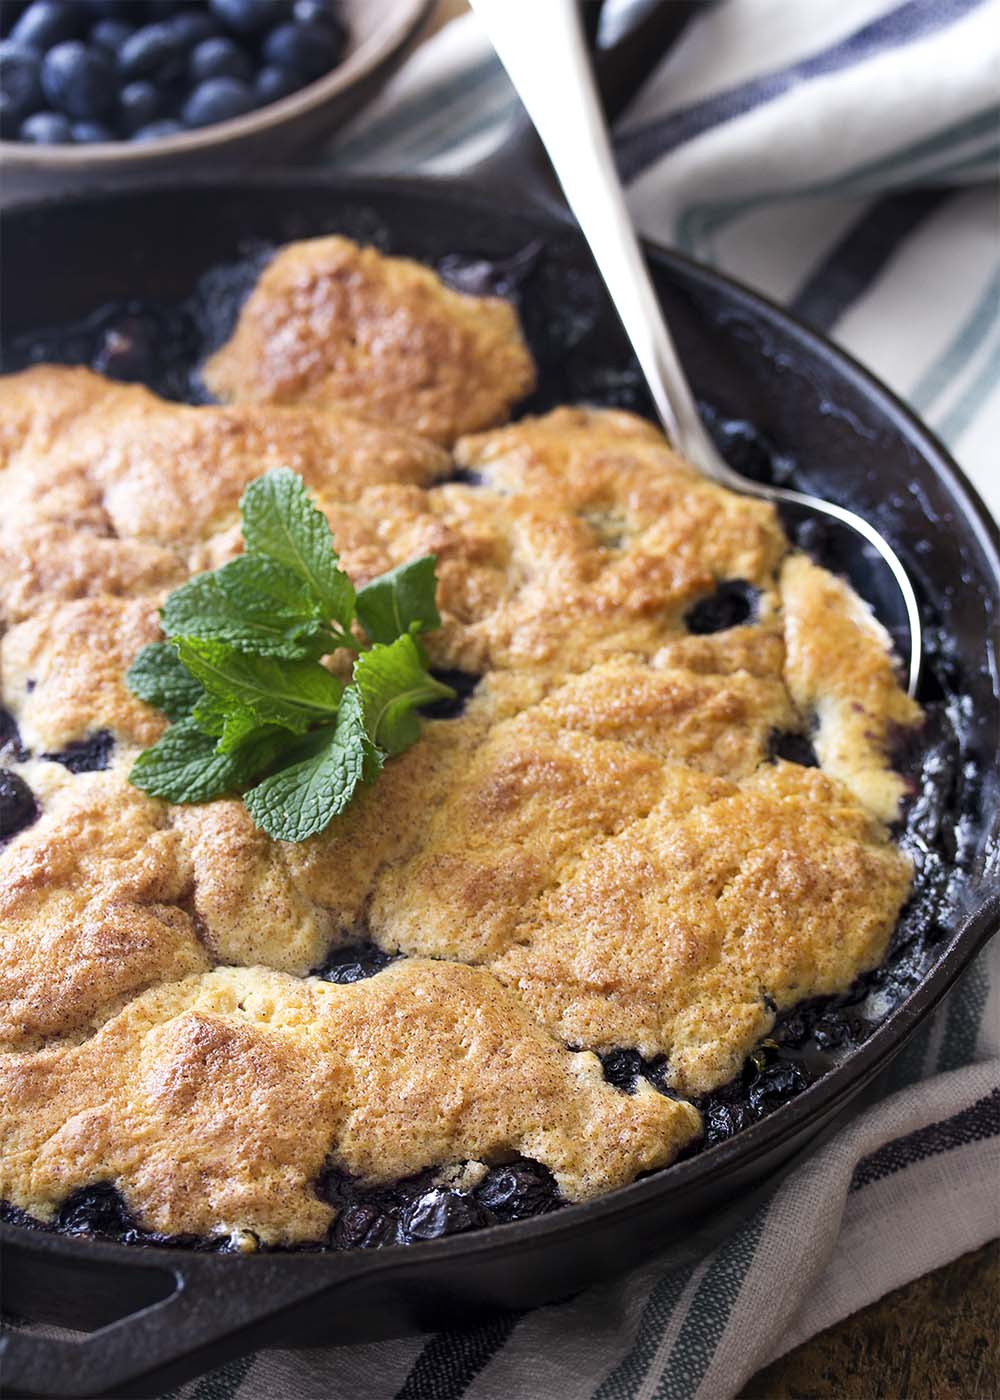 A cast iron skillet full of baked blueberry cobbler. A serving spoon in the skillet ready to scoop some out.